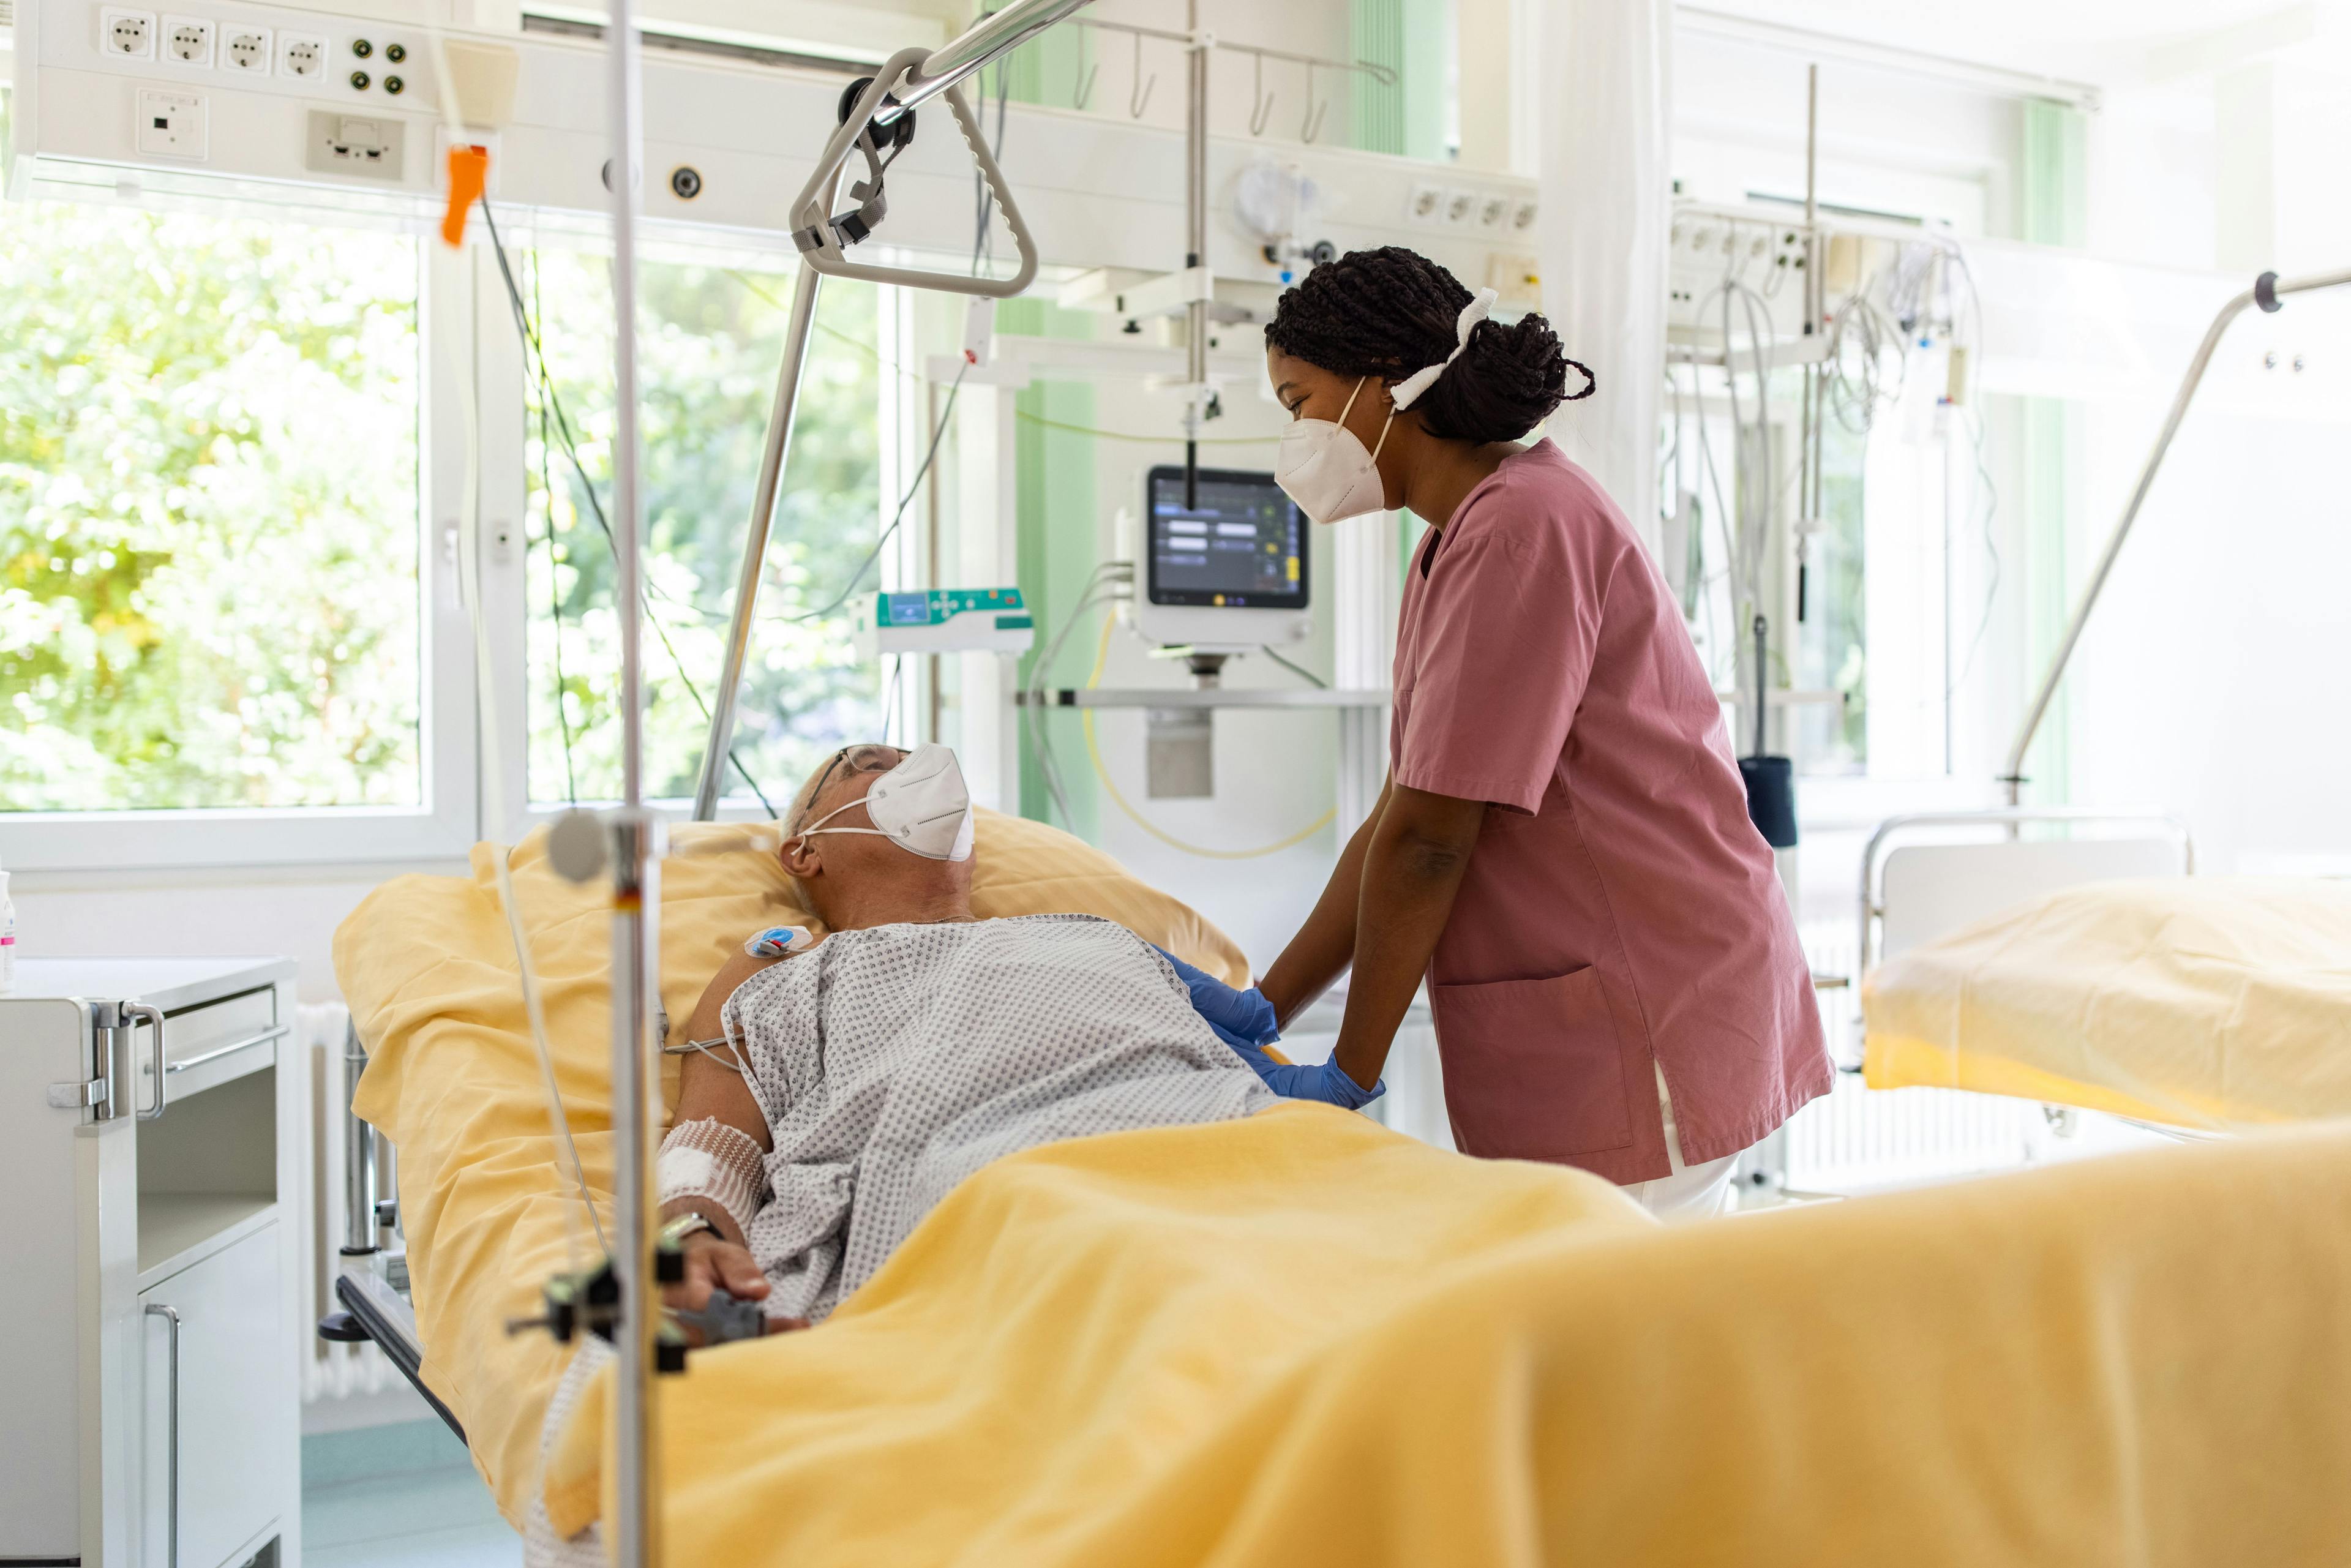 A Black nurse looks after an older patient in an ICU.